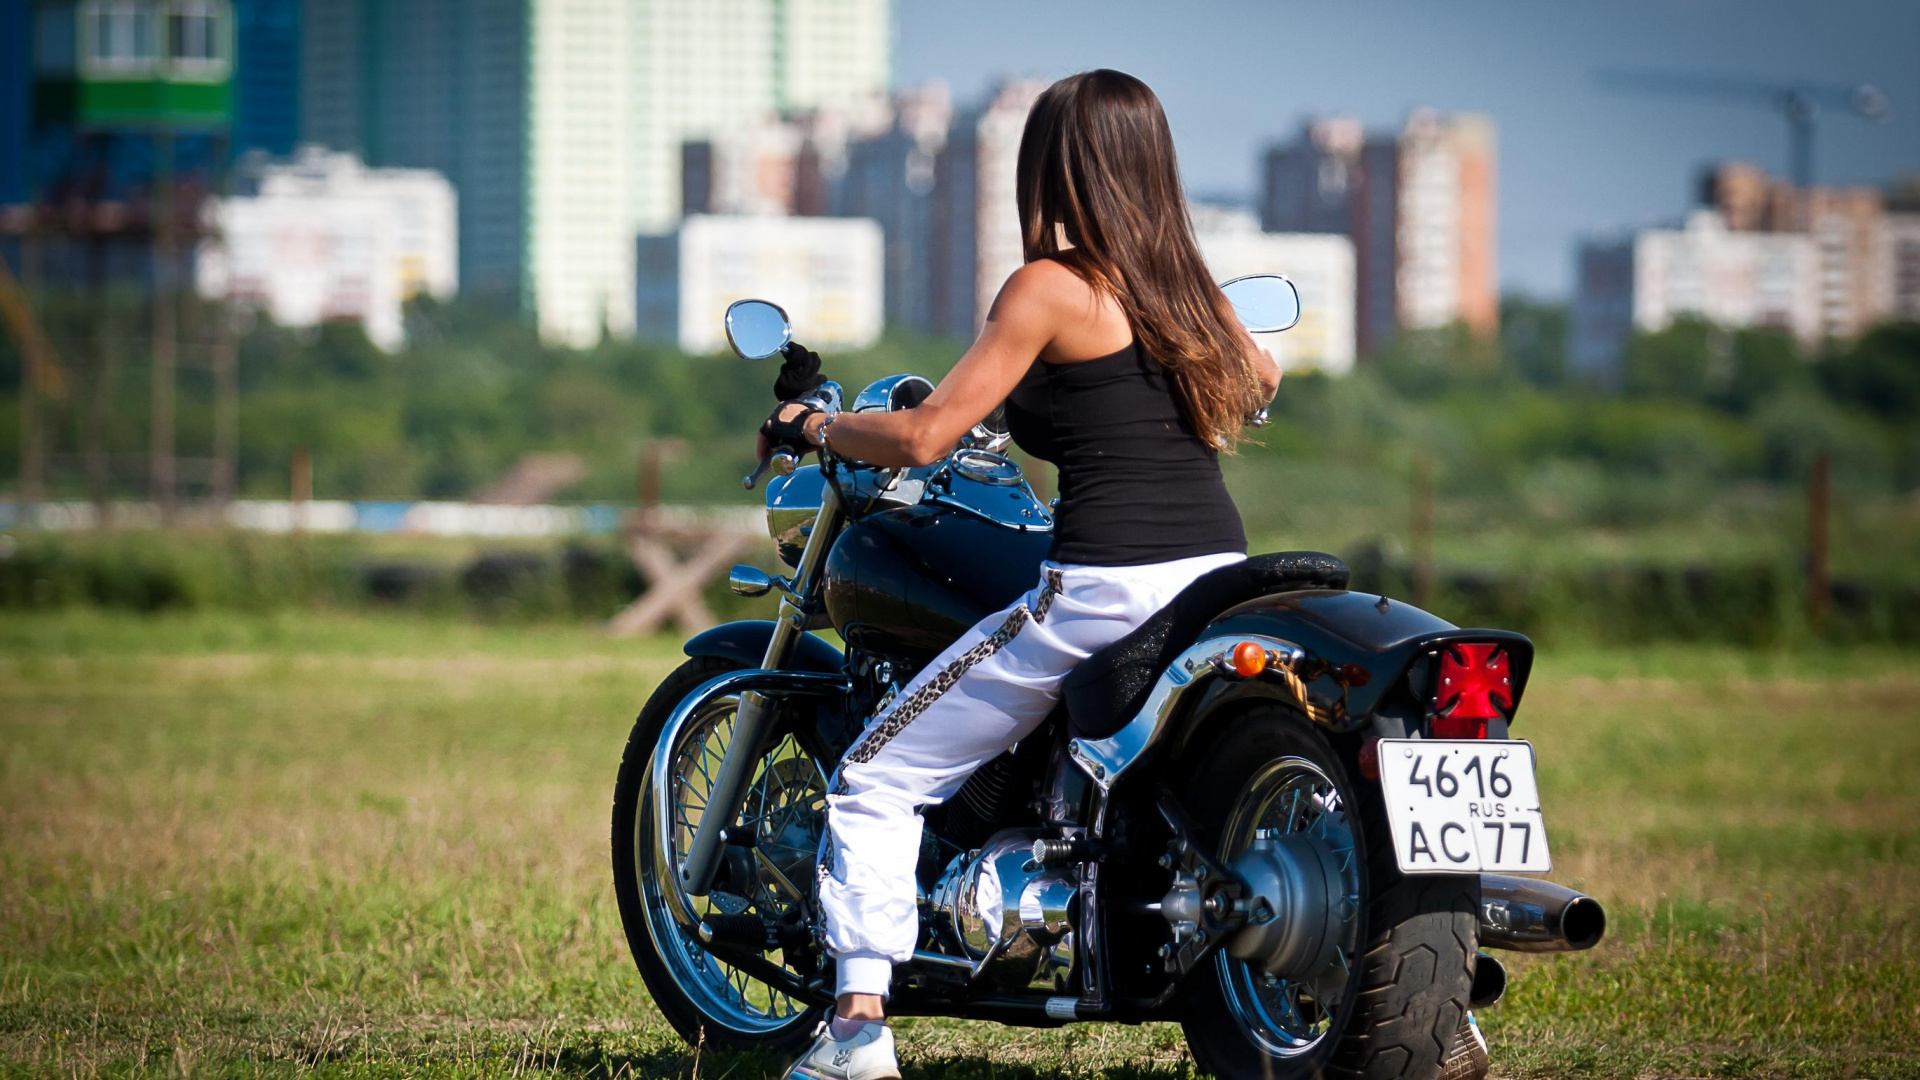 Woman in Blue Tank Top Riding on Black and White Motorcycle During Daytime. Wallpaper in 1920x1080 Resolution